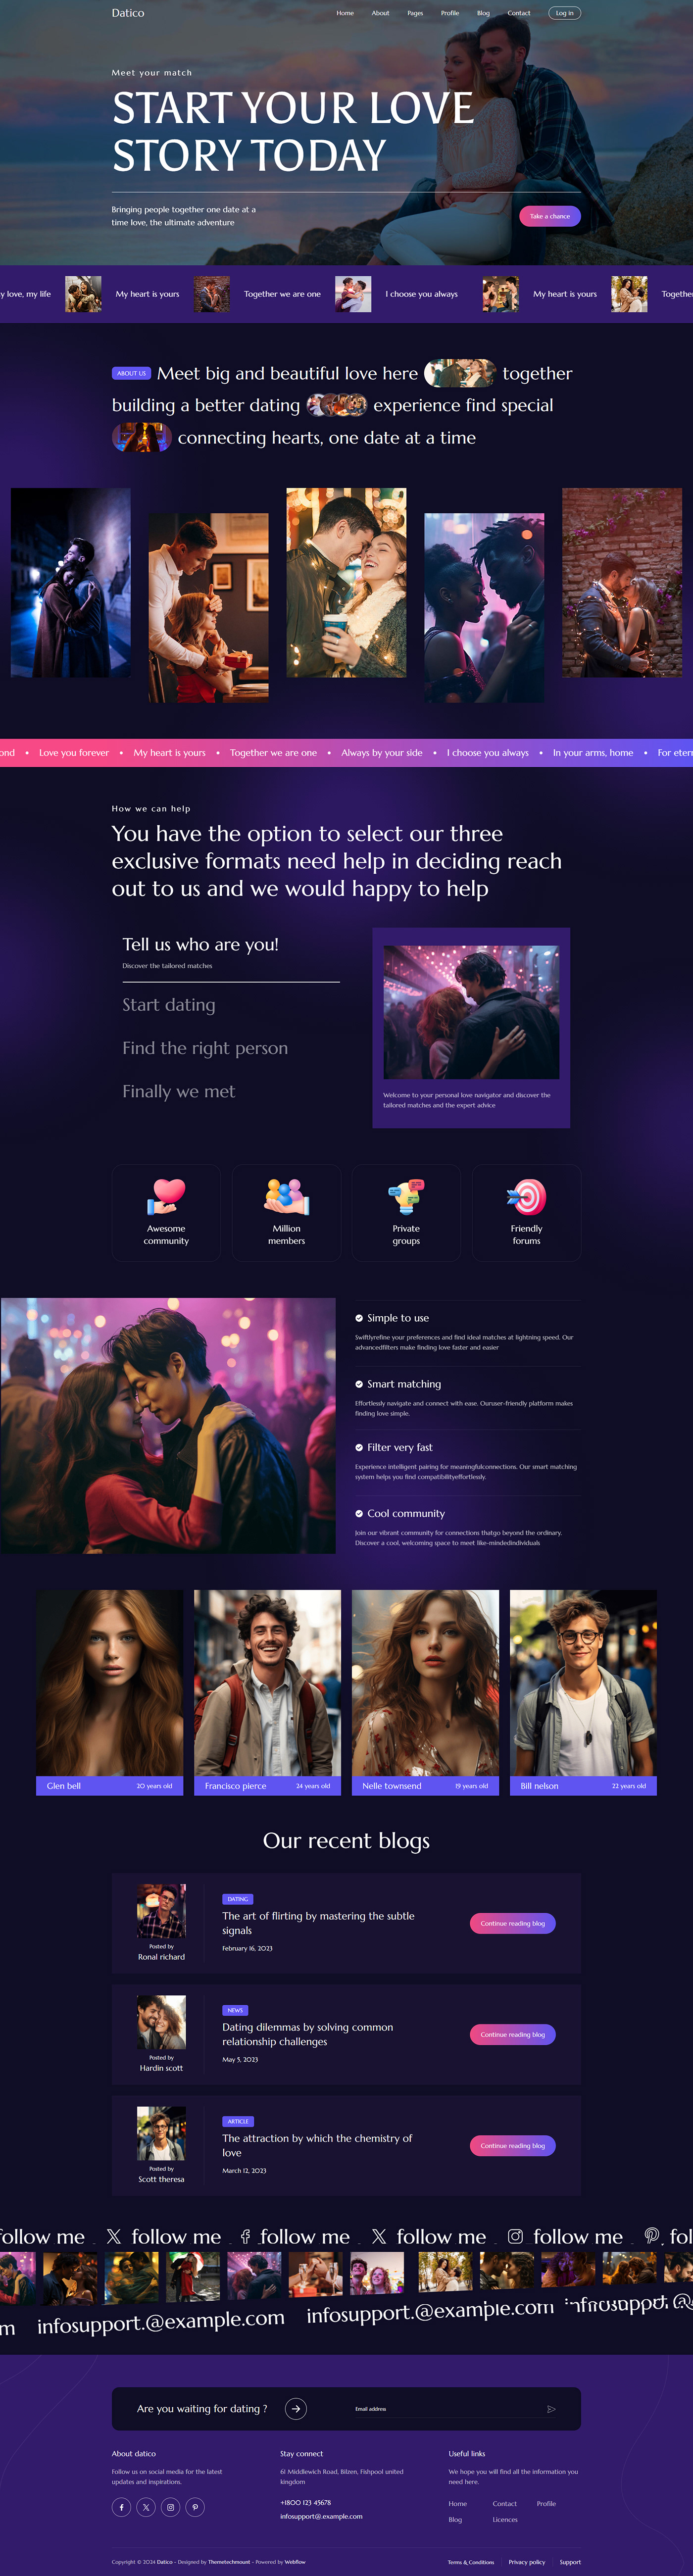 Datico is an magnificent Webflow template for any dating or community website. It is perfect for com